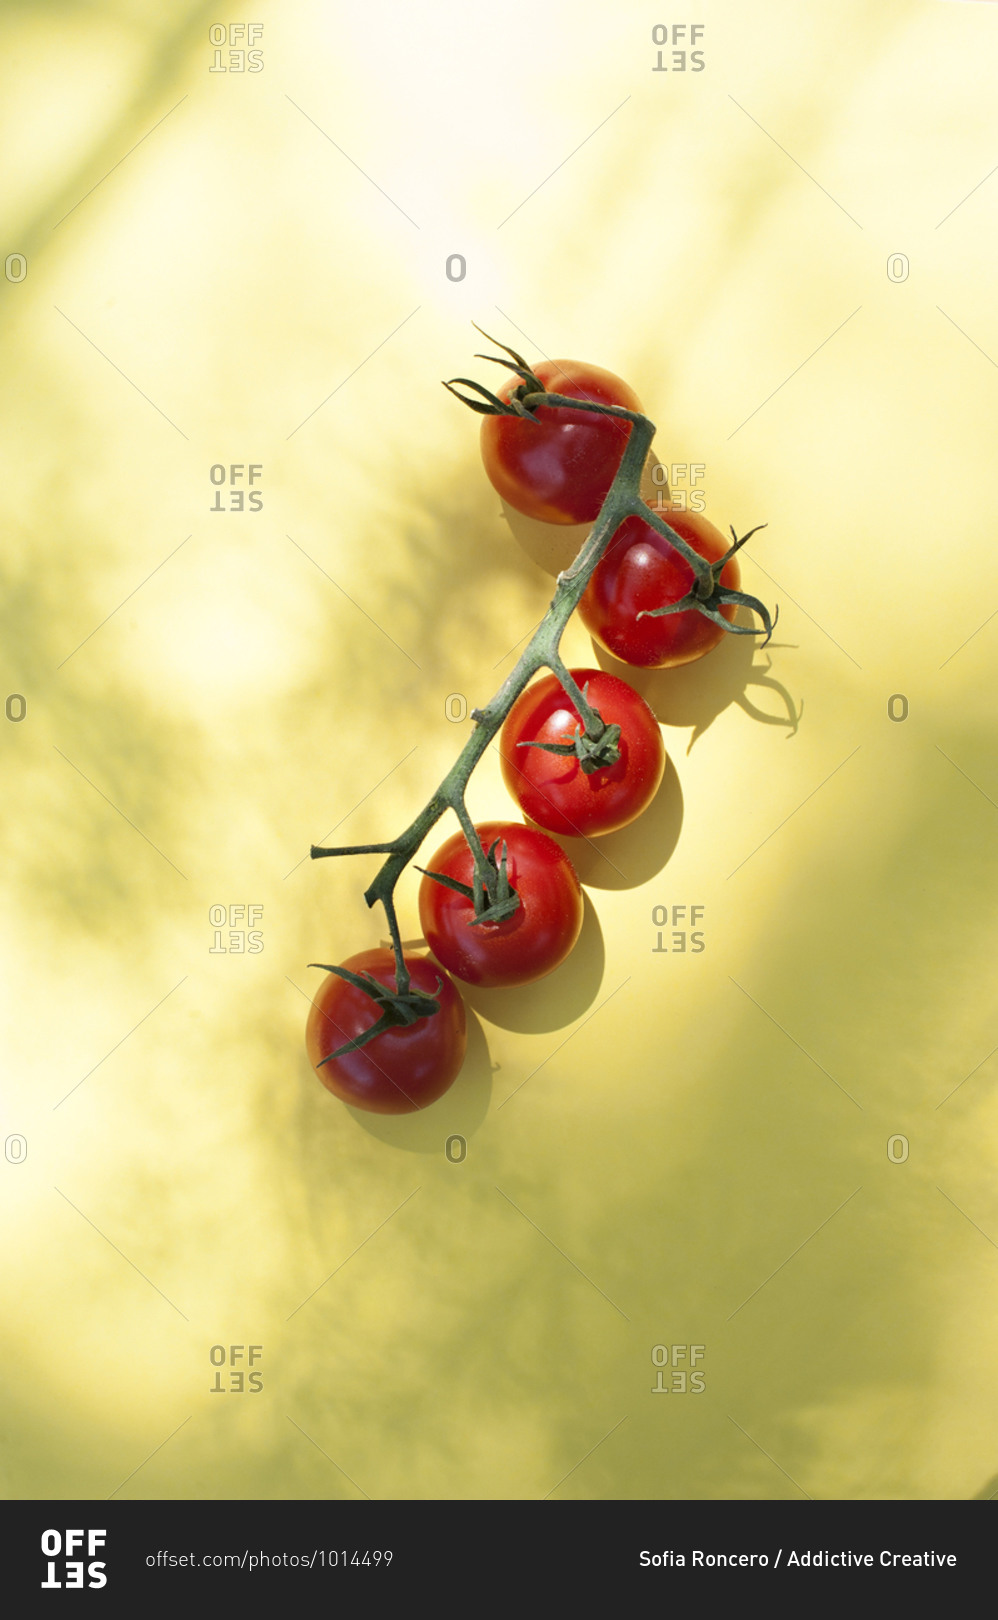 Top view of bunch of ripe red cherry tomatoes with green stems placed on yellow background